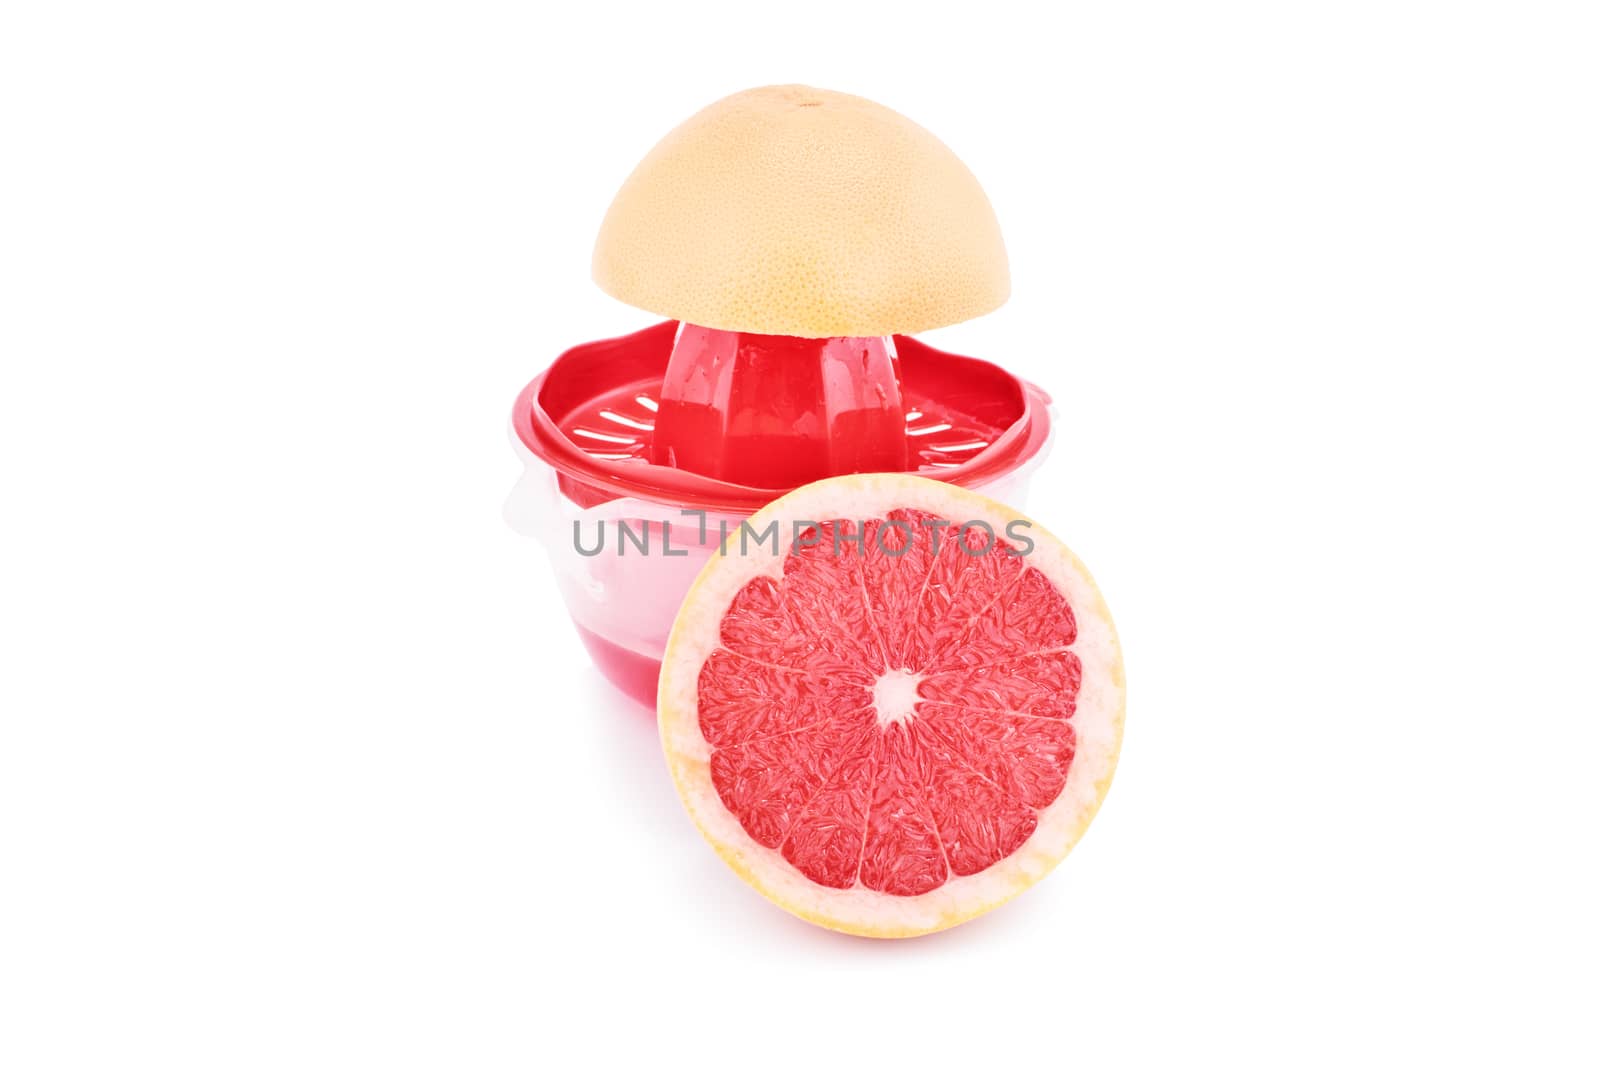 Half filled squeezer with citrus slices, isolated on white background. Making fresh grapefruit juice.